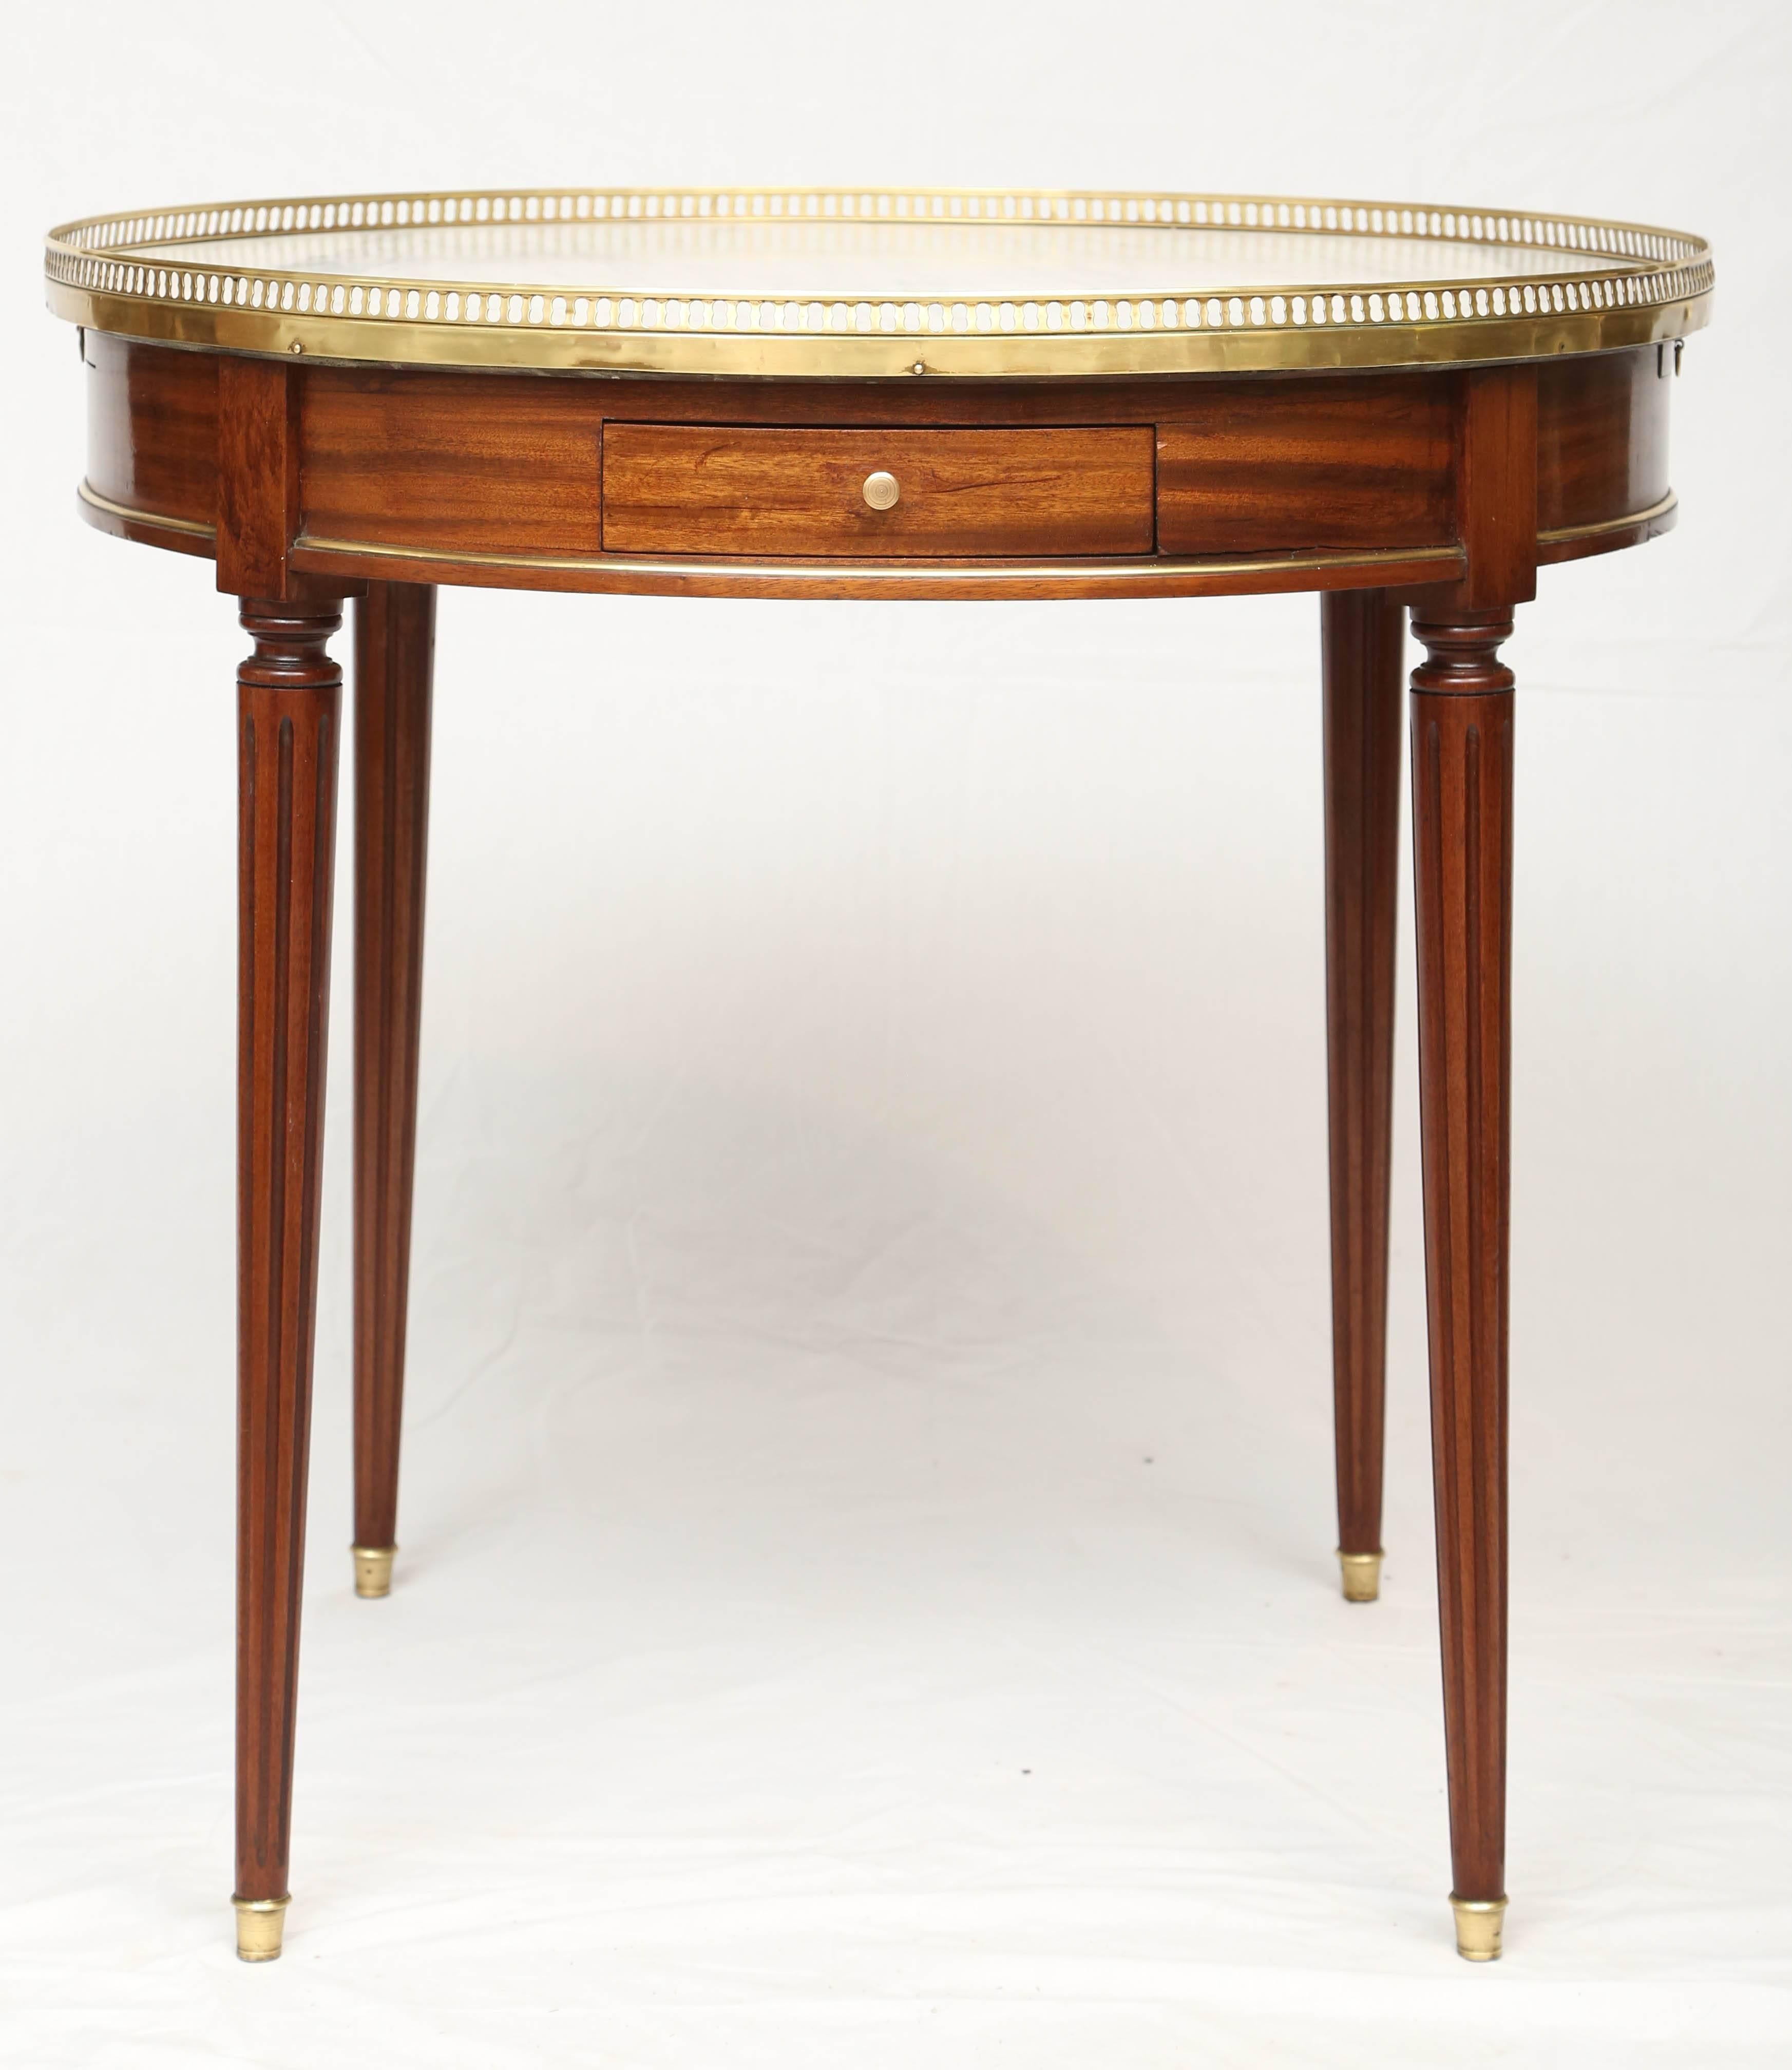 Bouillotte table, having a round top of white marble, surrounded by pierced gallery of polished brass, its apron revealing double slides, and two drawers, raised on round, tapering, fluted legs, ending in brass feet.